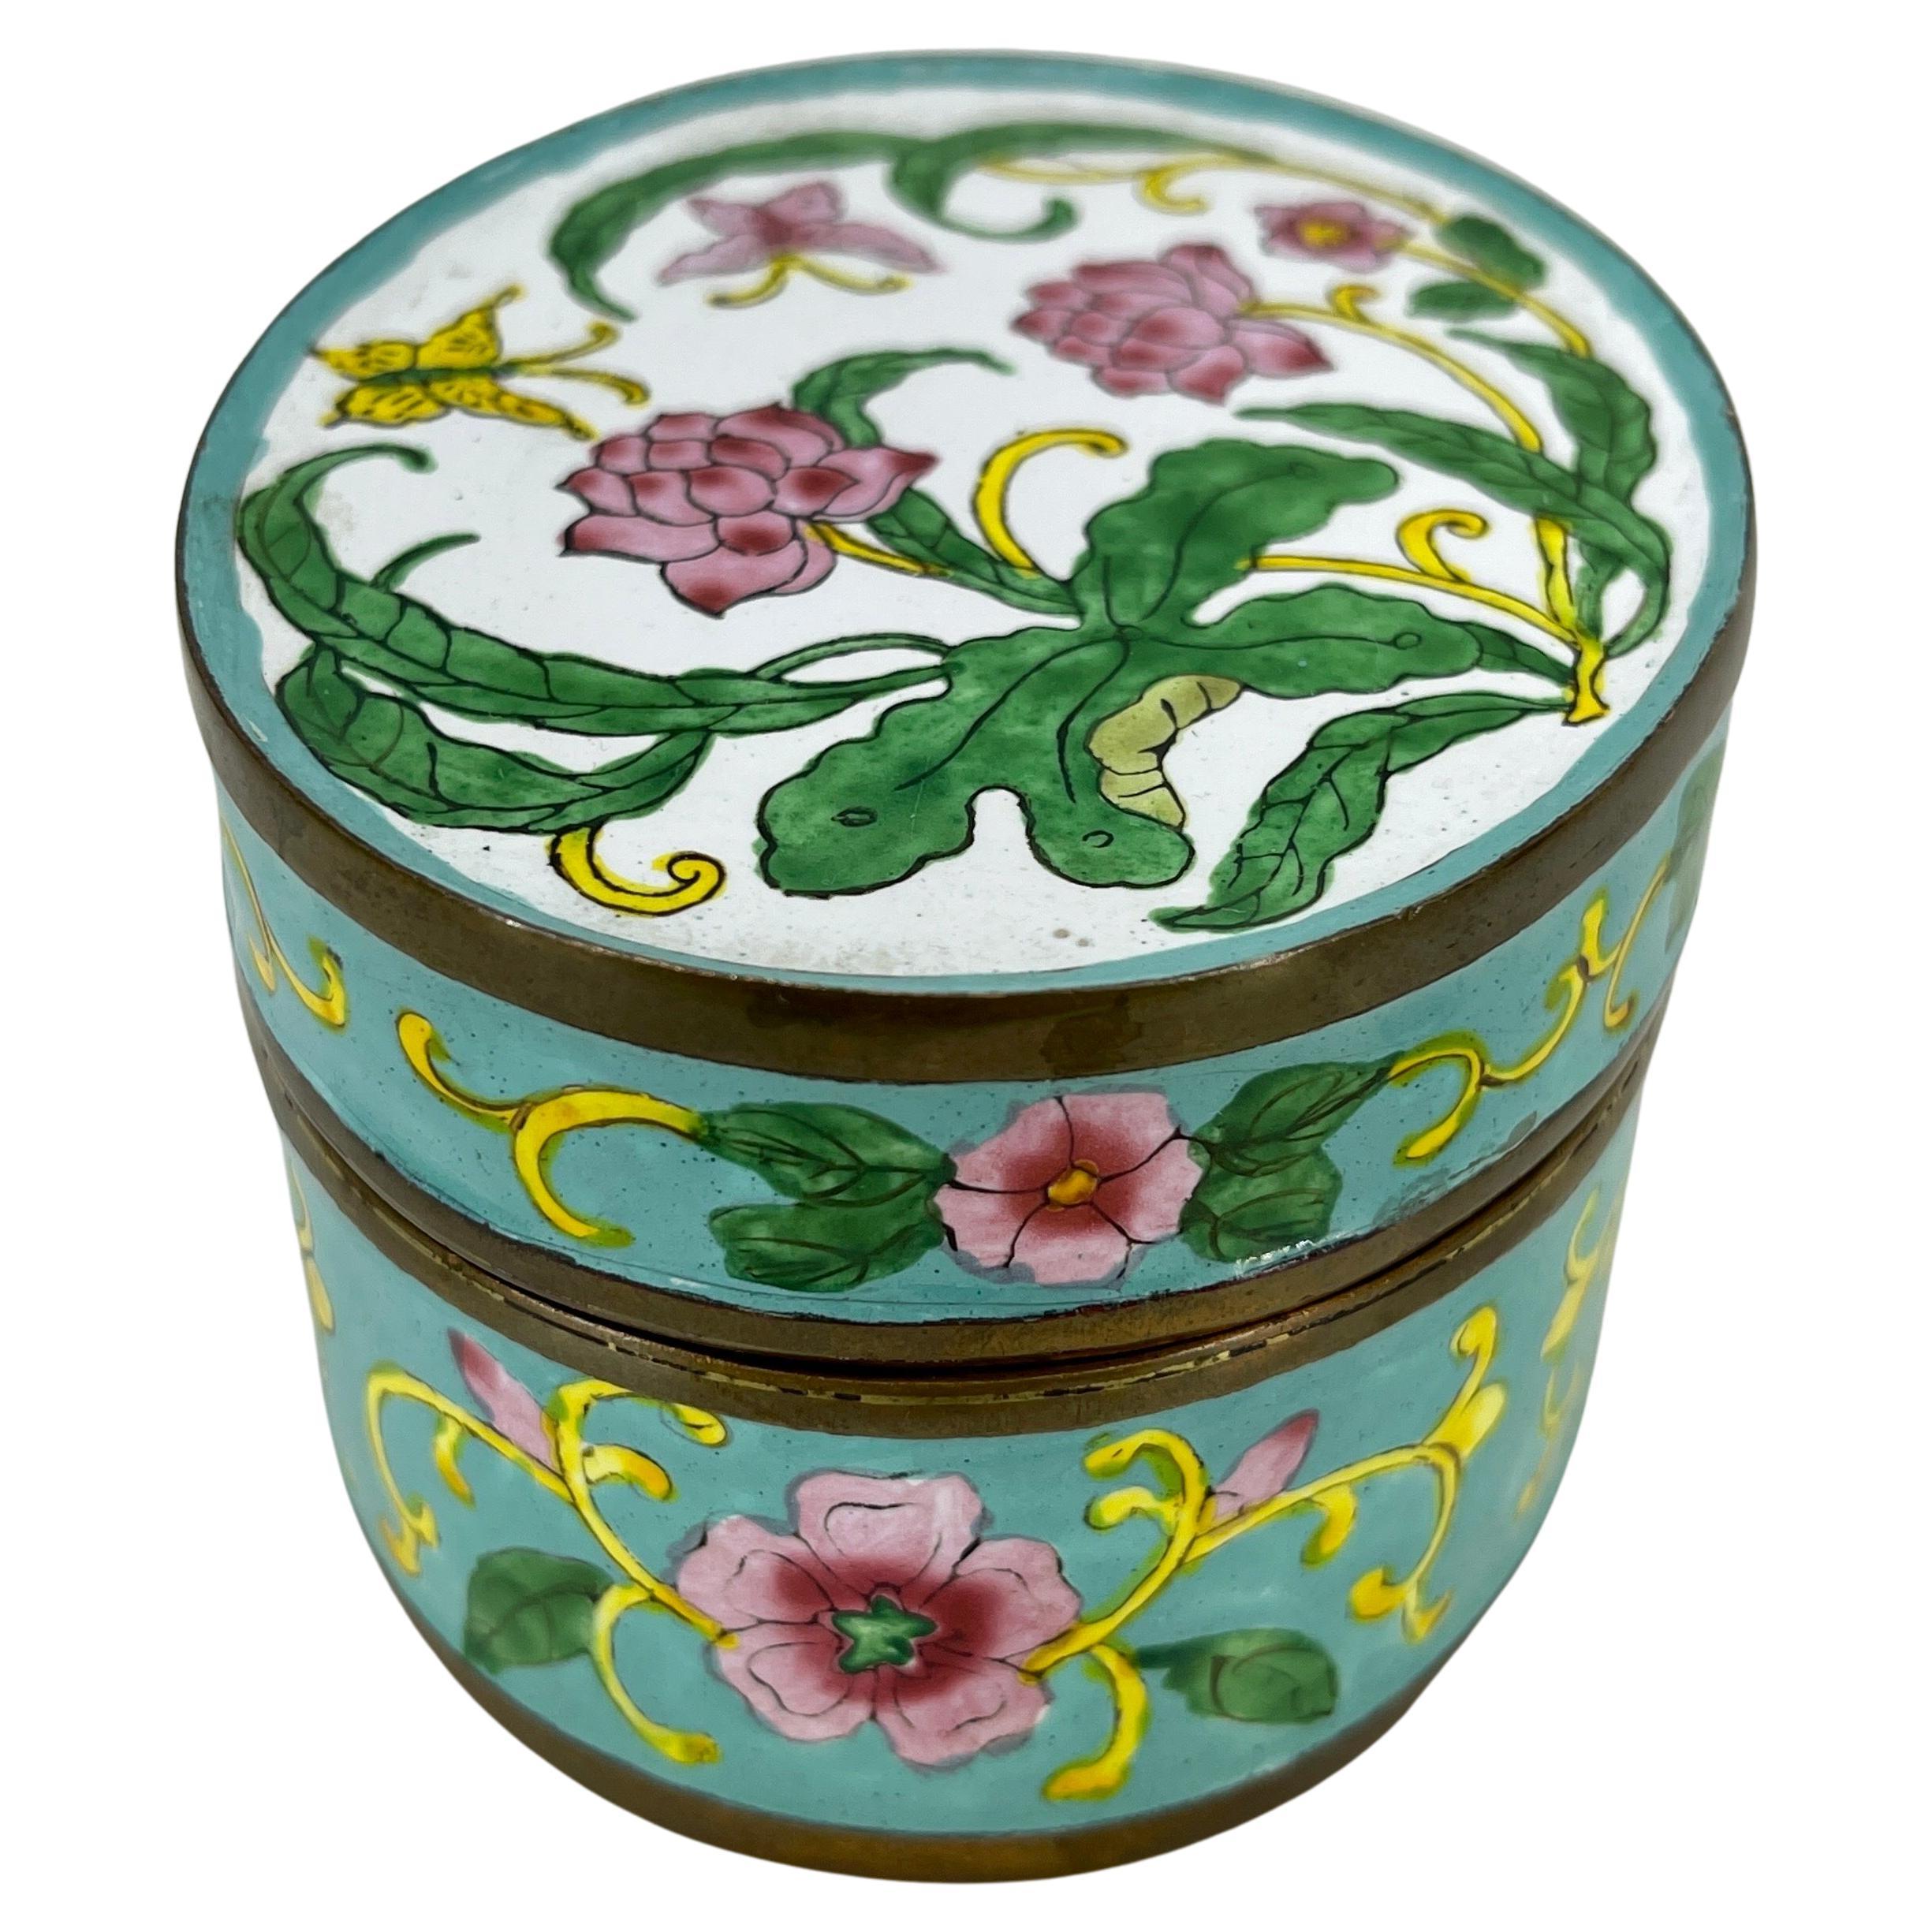 Antique Oval Cloisonné Enamel Jewelry box with flower decoration, China 1930's. The inside of the box has a strong green enamel.